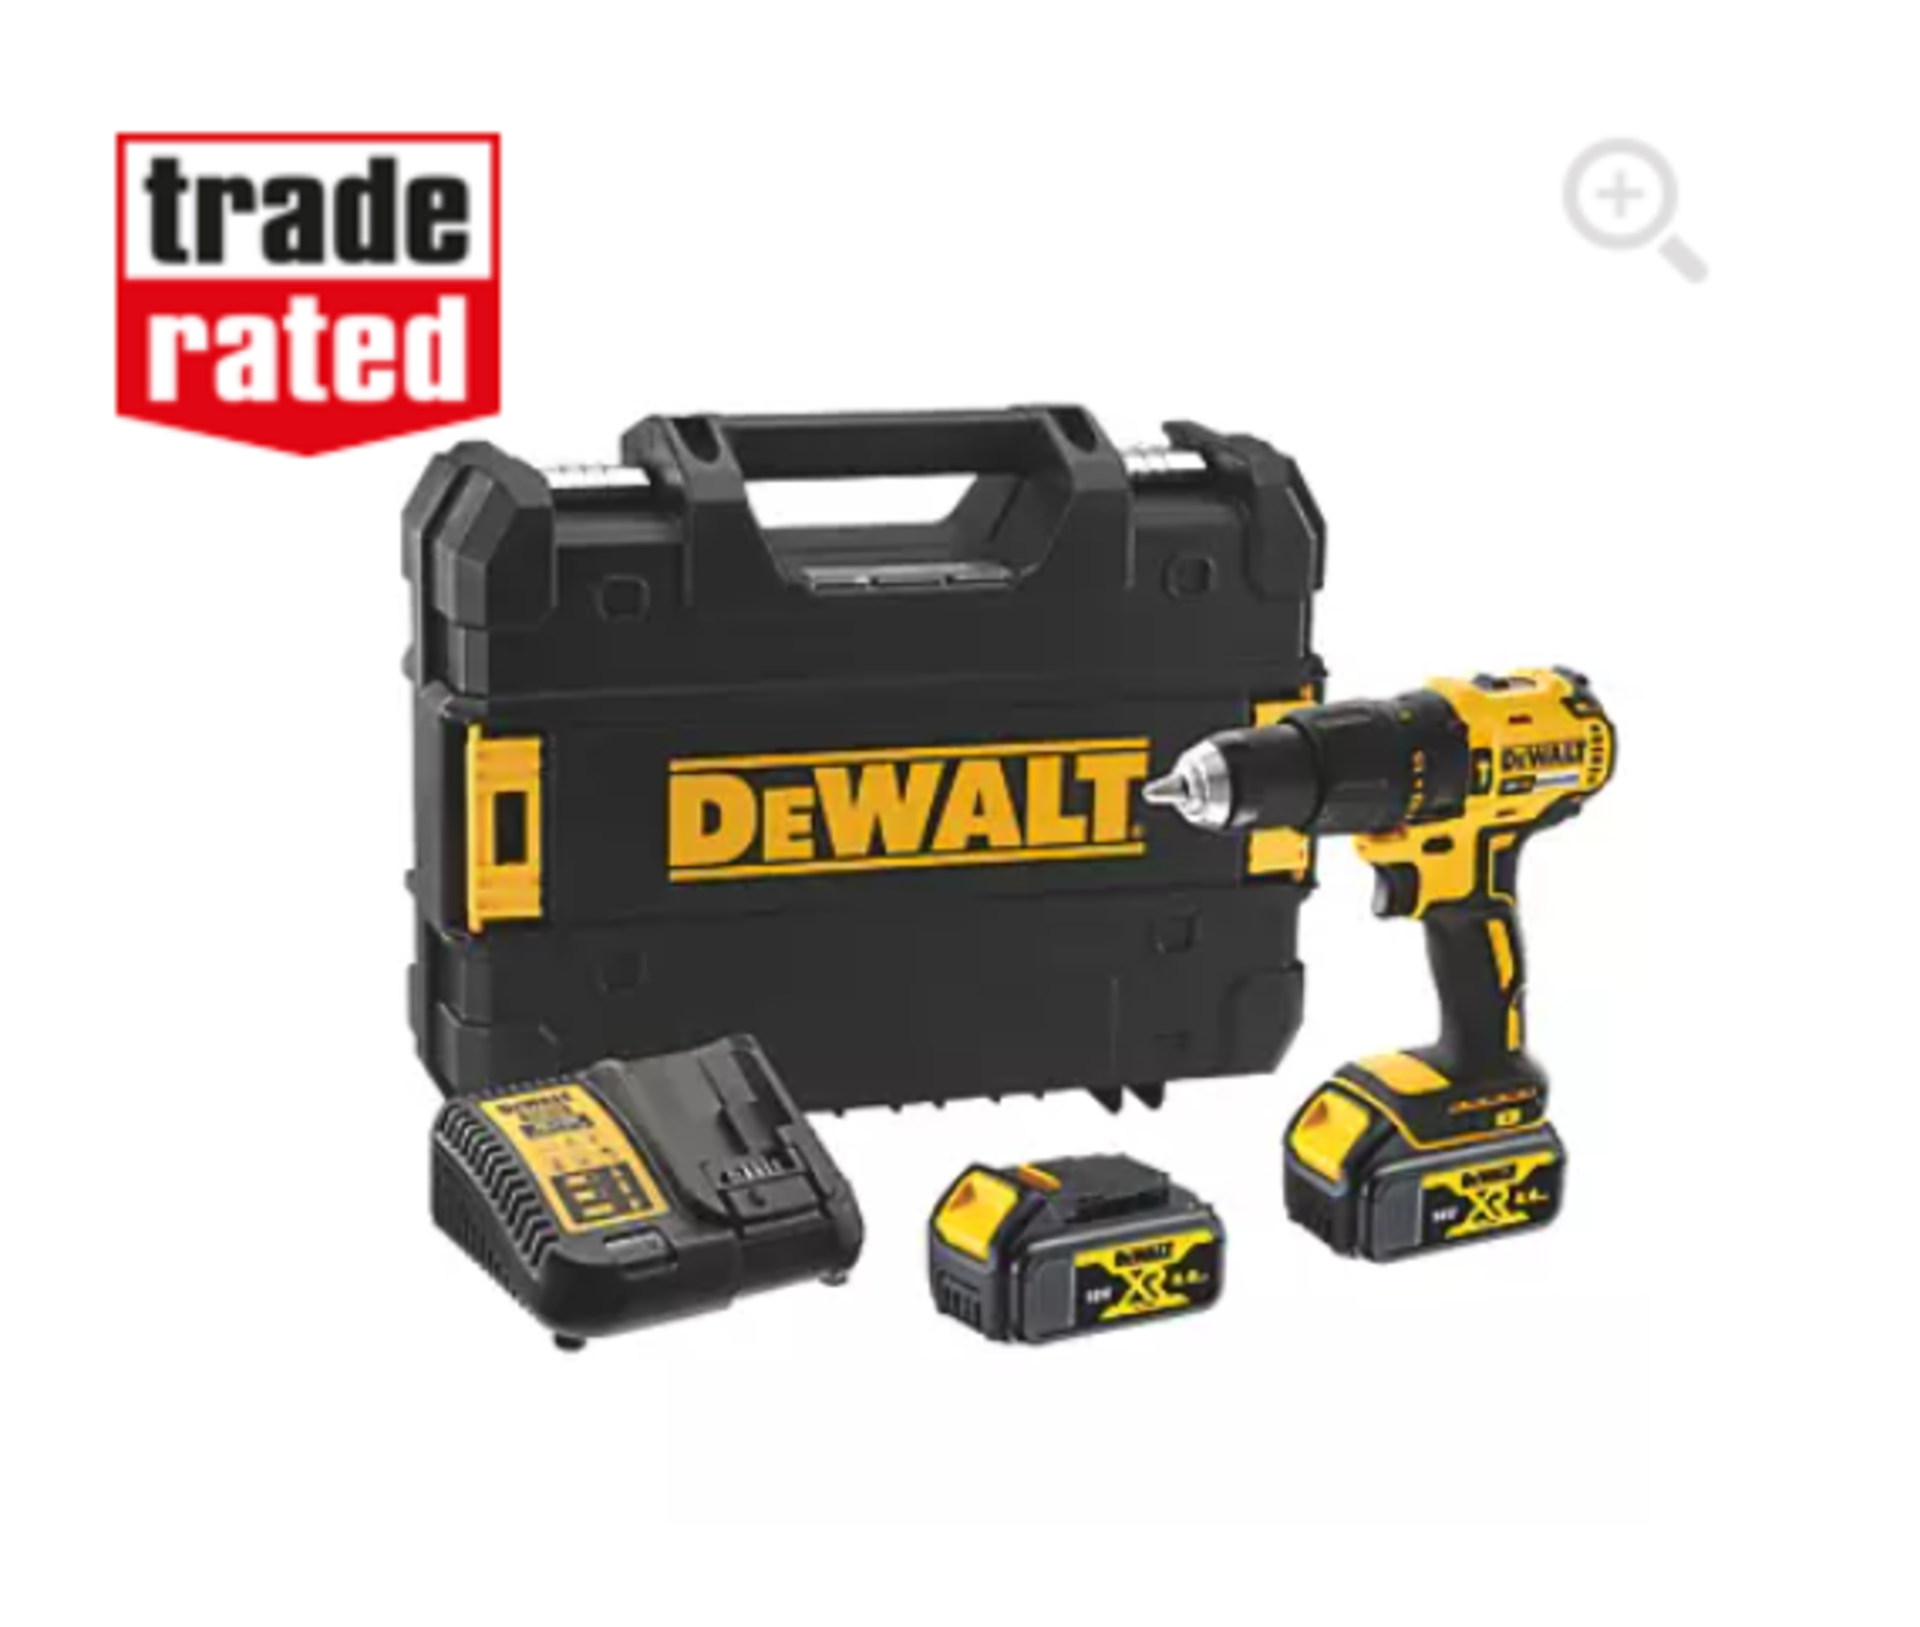 DEWALT DCD778M2T-SFGB 18V 2 X 4.0AH LI-ION XR BRUSHLESS CORDLESS COMBI DRILL WITH BATTERY, CHARGER